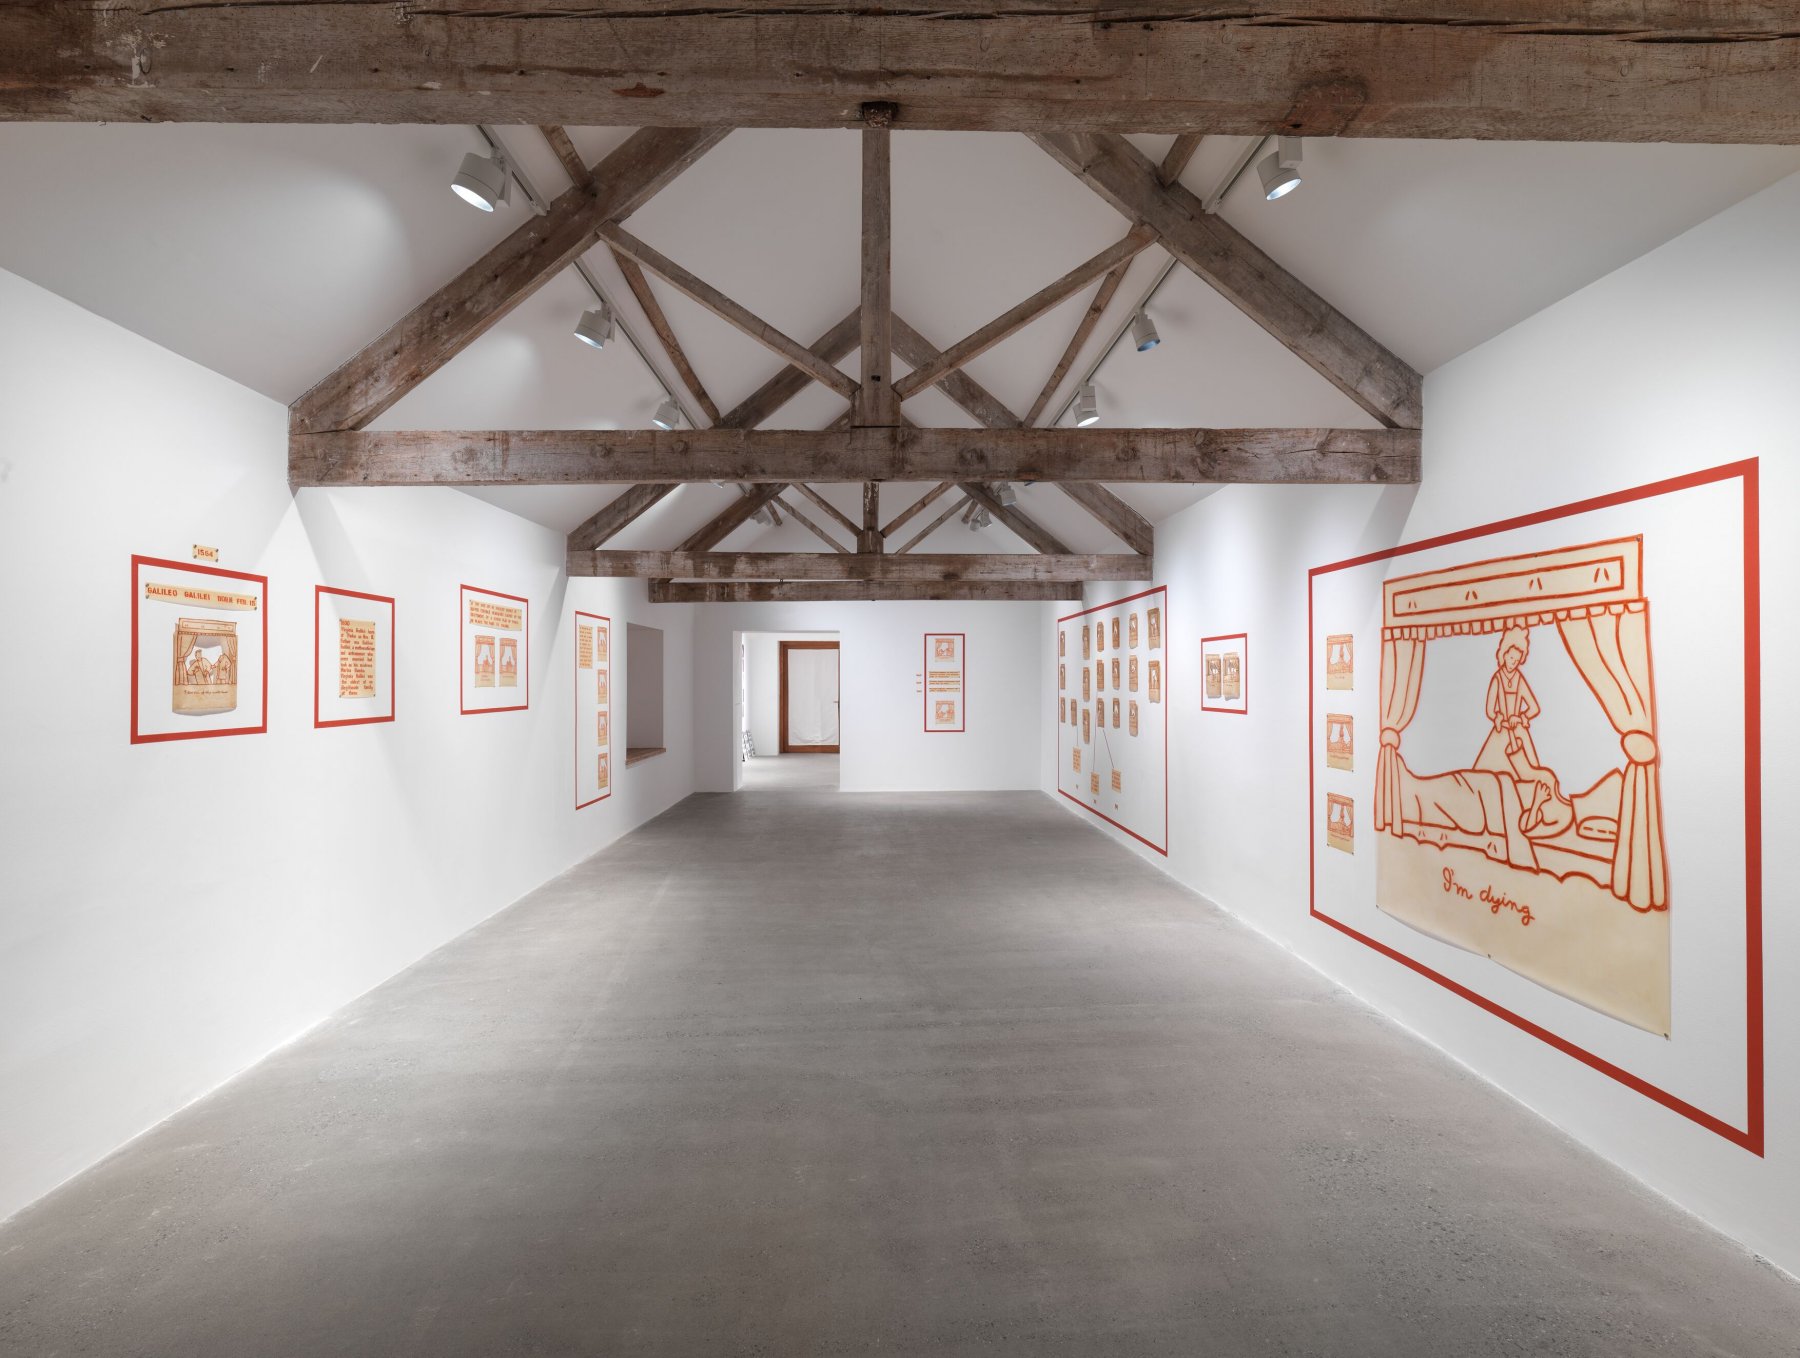 Installation image for Ida Applebroog. Right Up To Now 1969 – 2021, at Hauser & Wirth